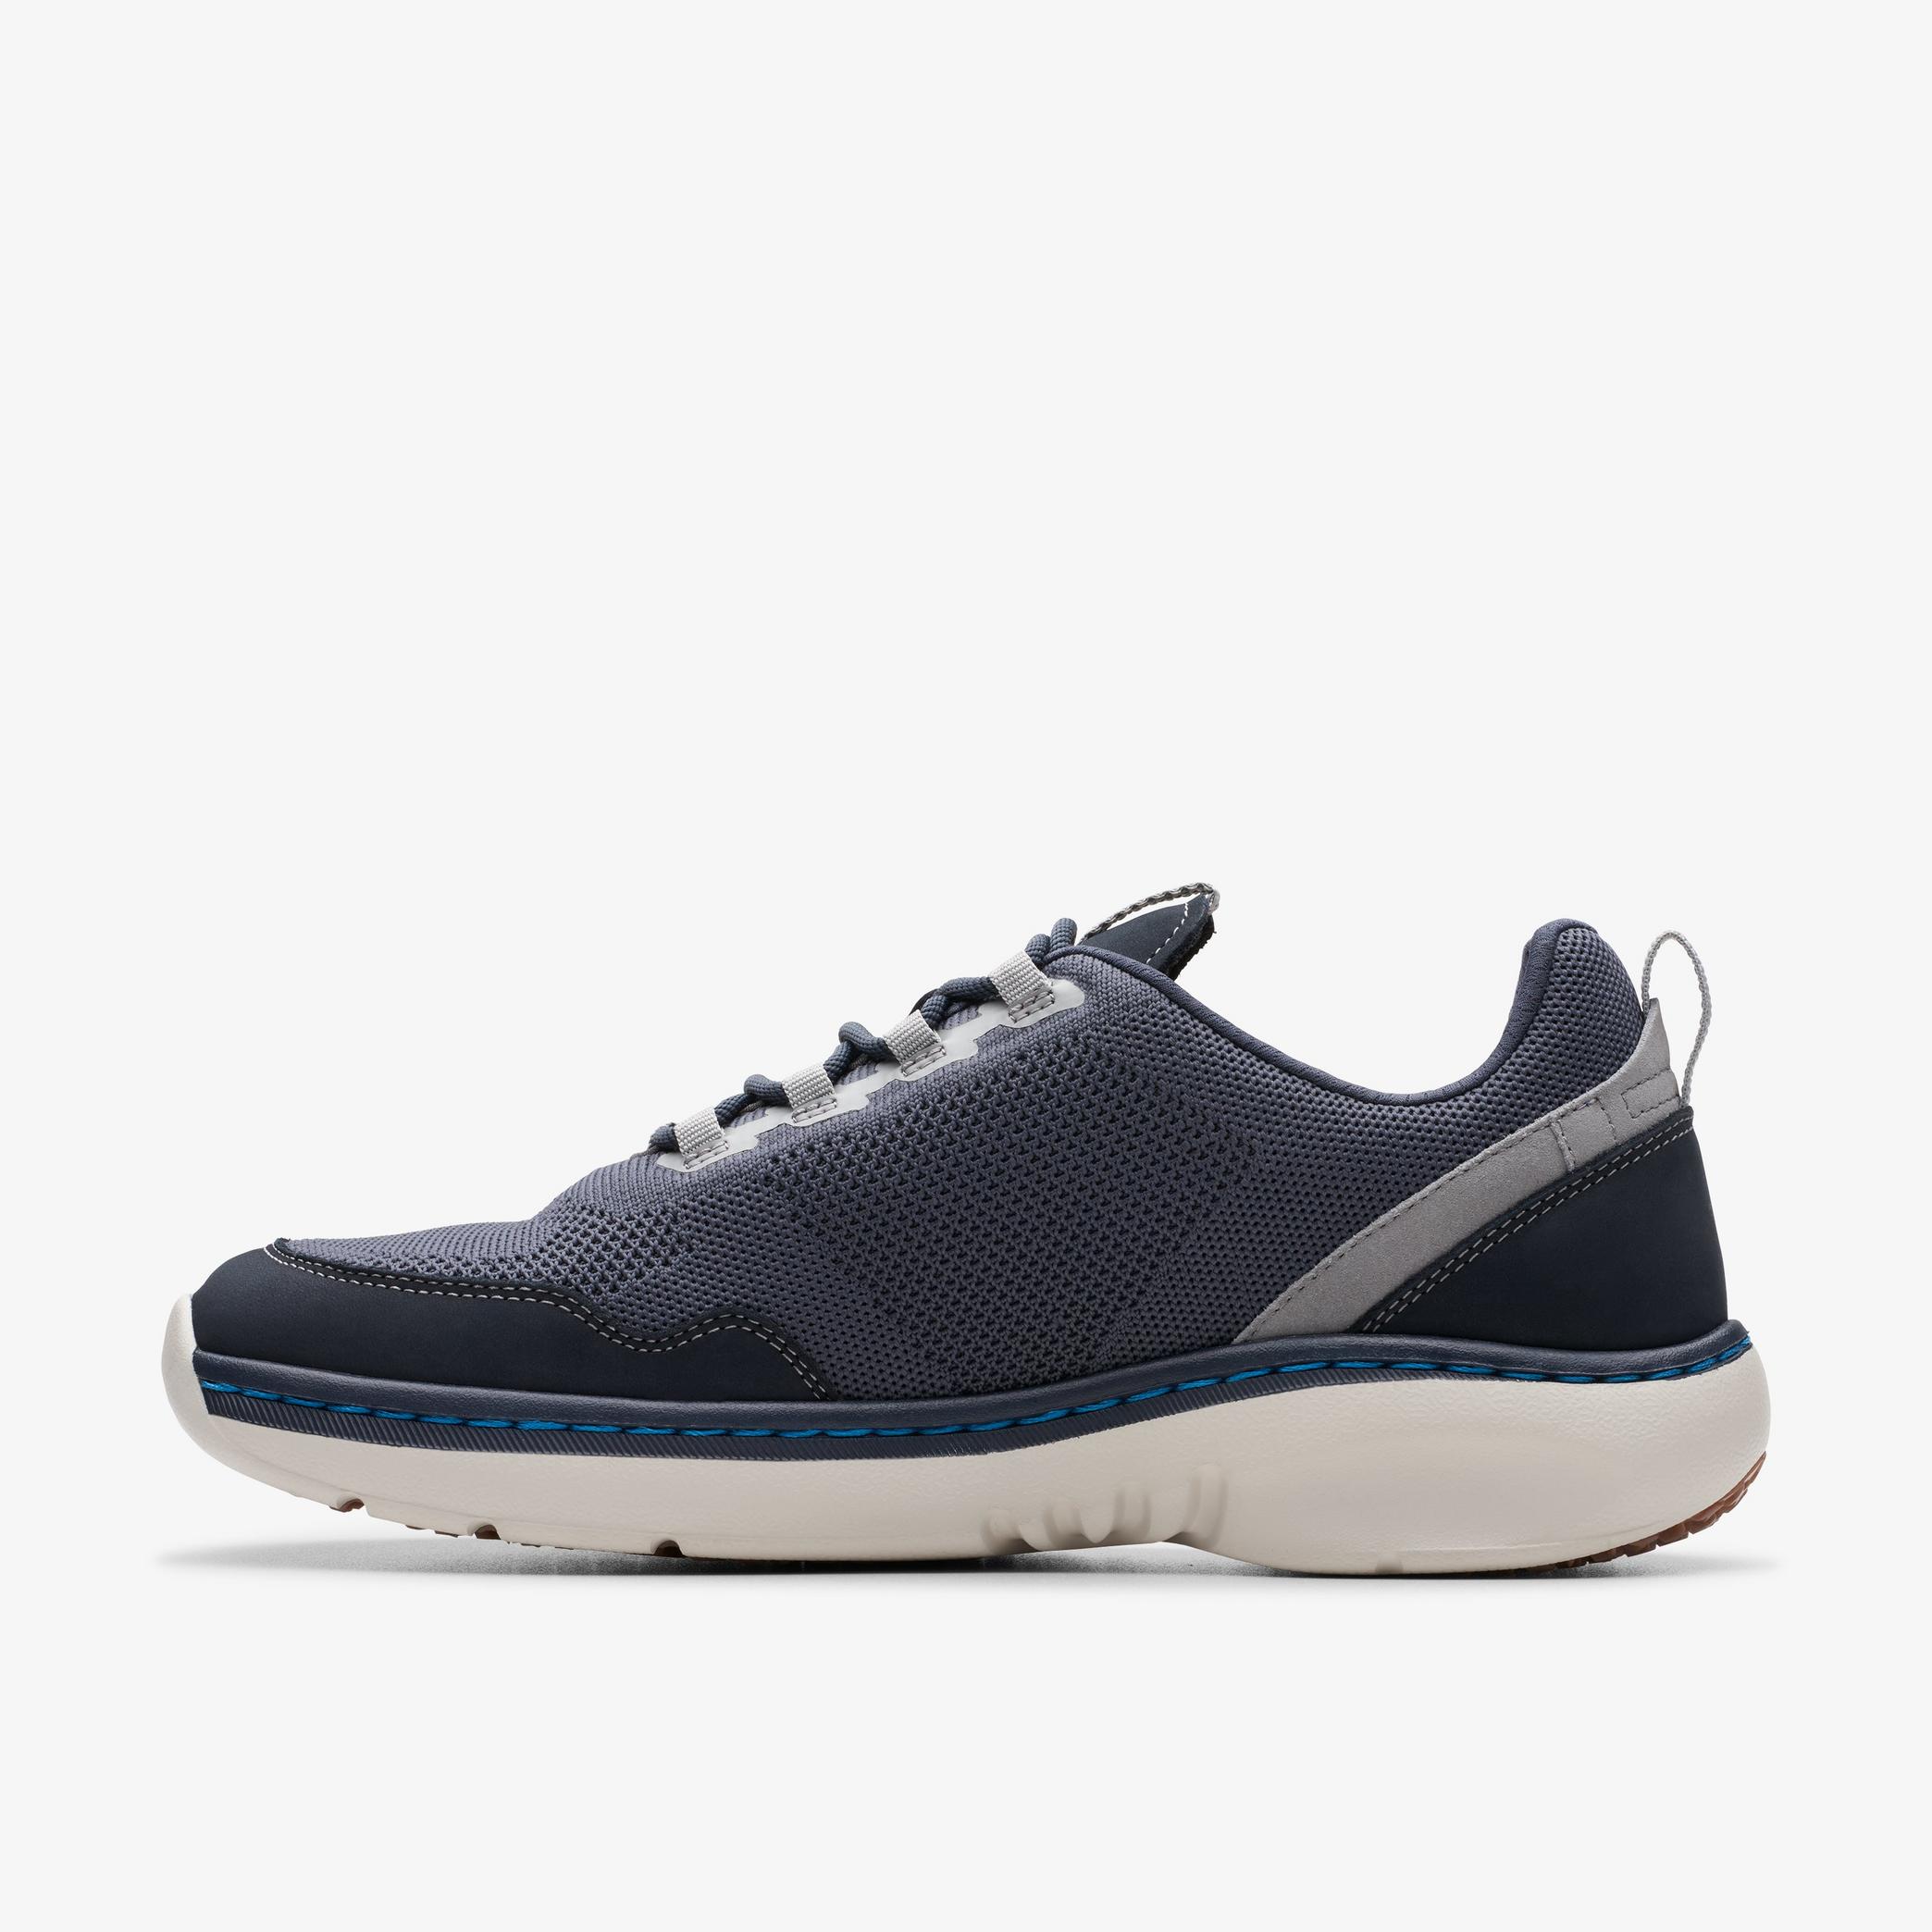 Clarks Pro Knit Navy Combination Sneakers, view 2 of 6